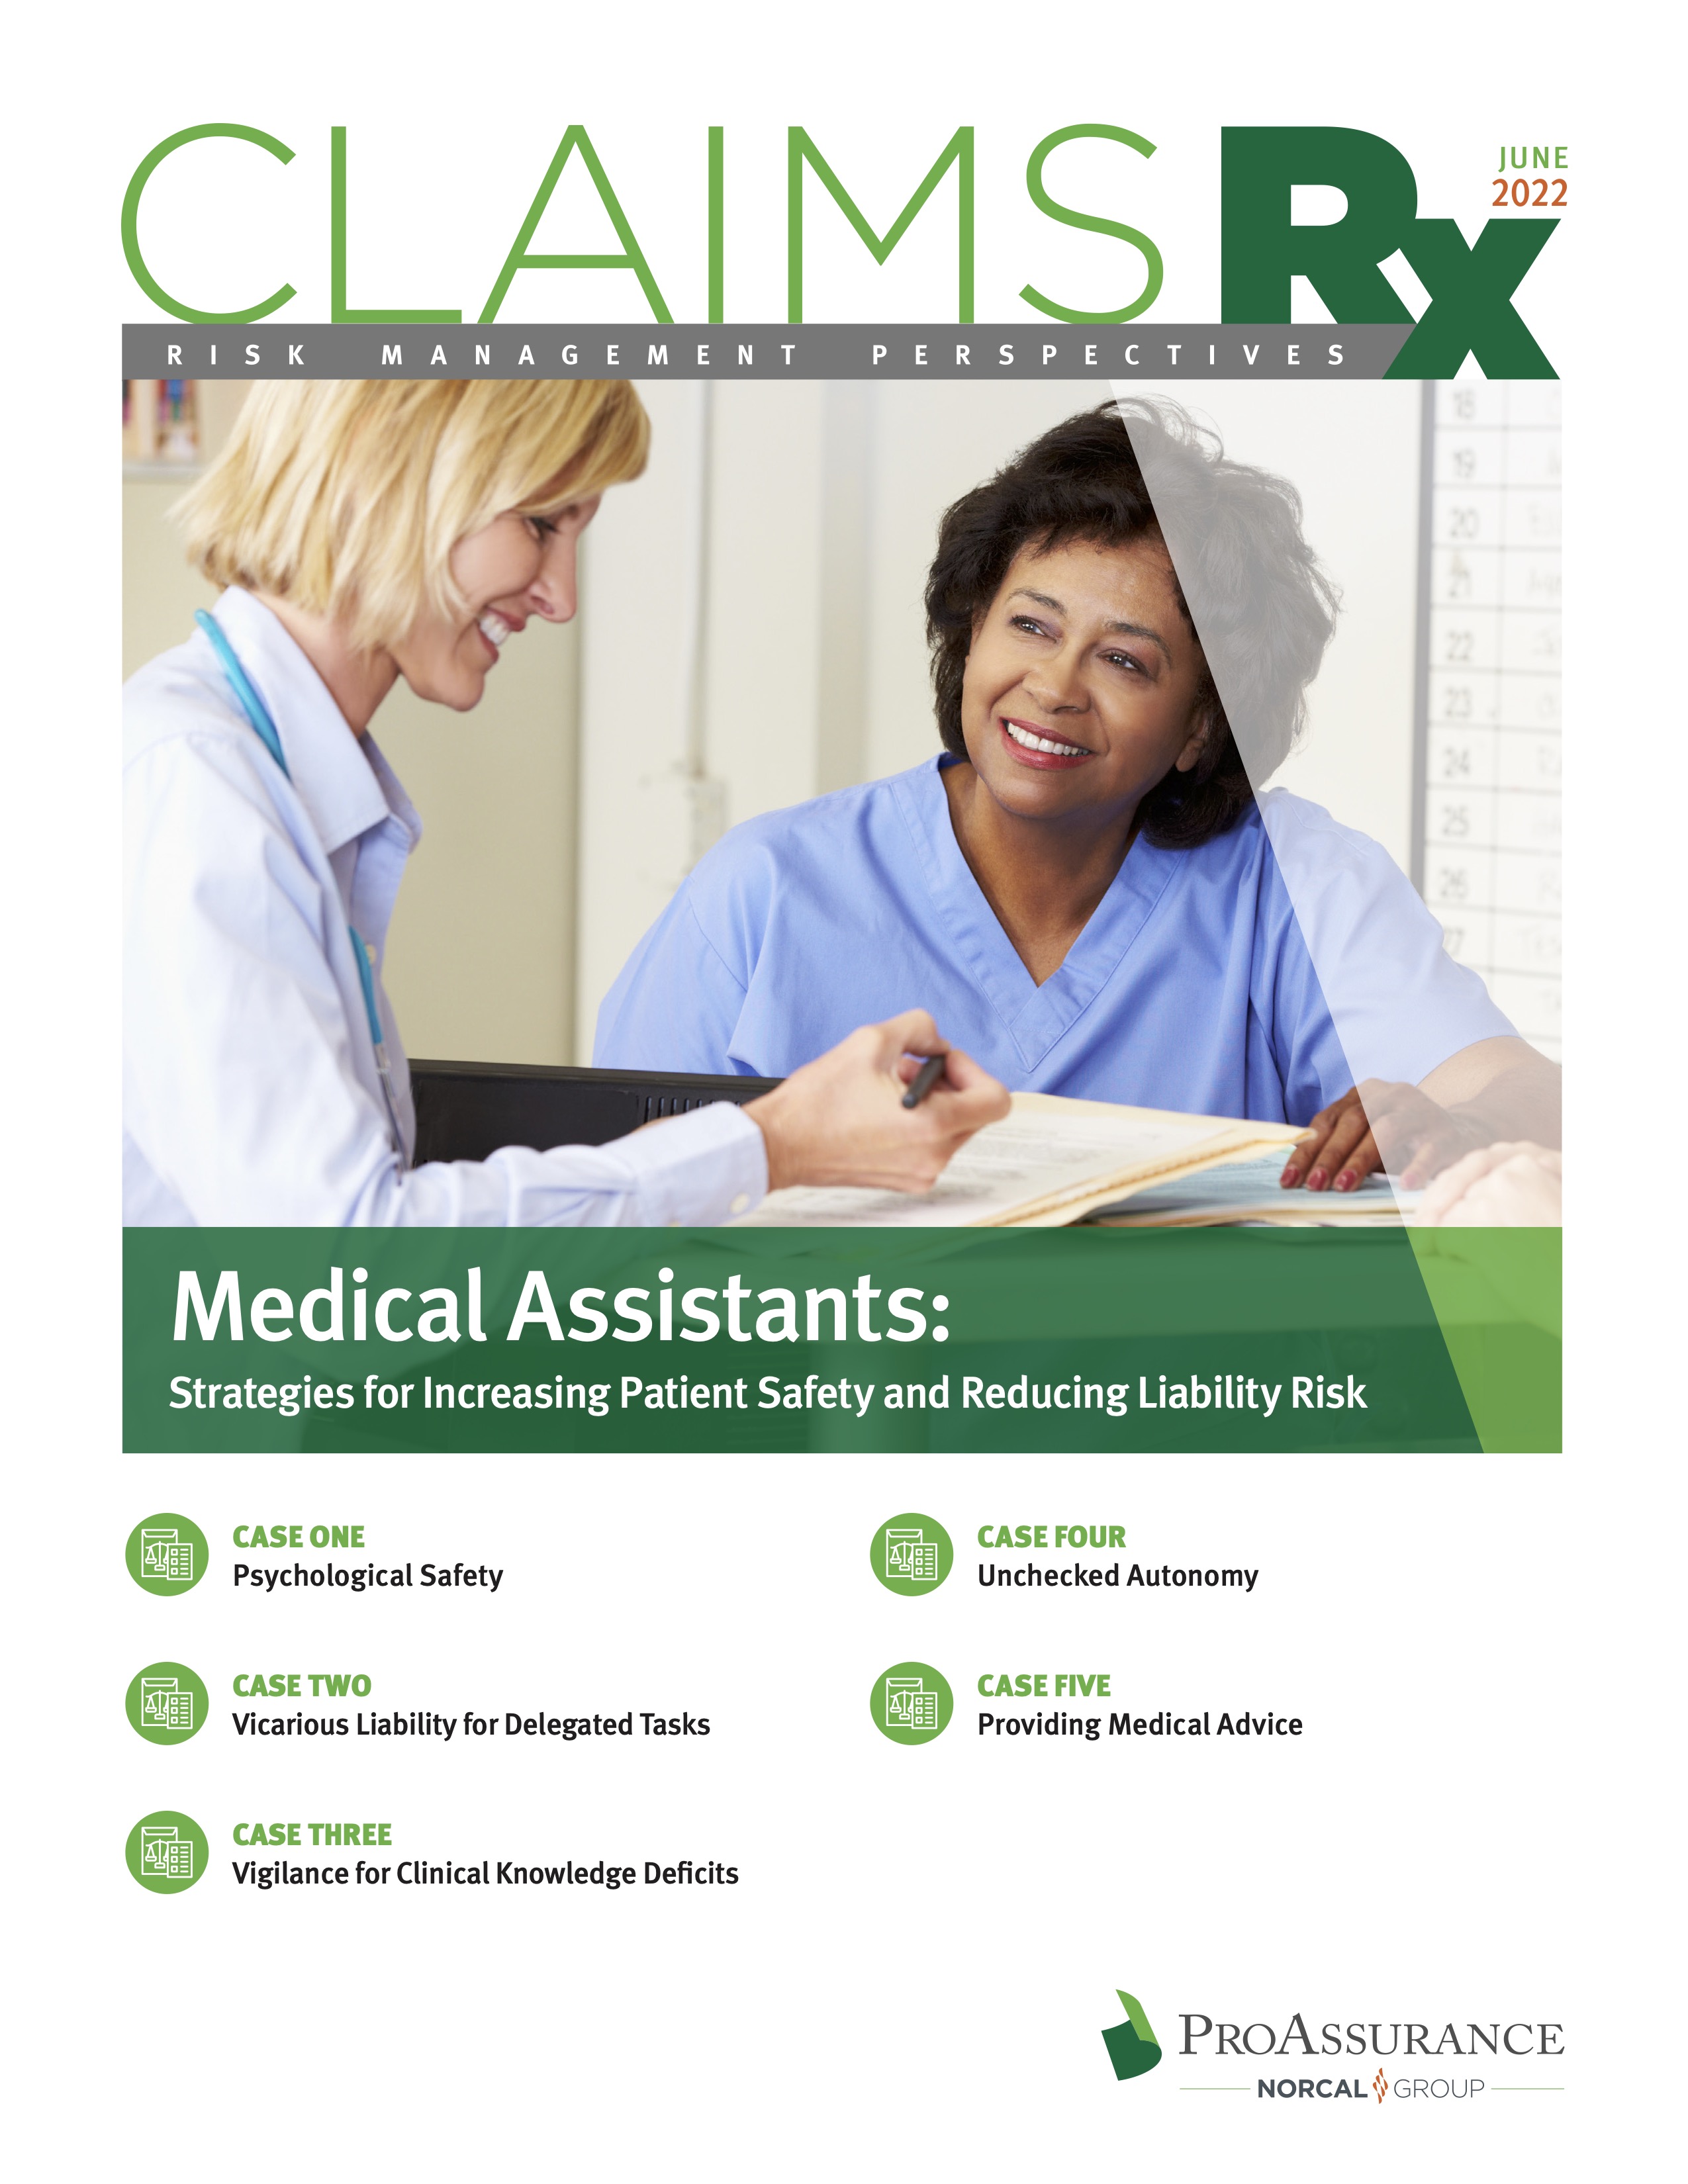 Medical Assistants: Strategies for Increasing Patient Safety and Reducing Liability Risk